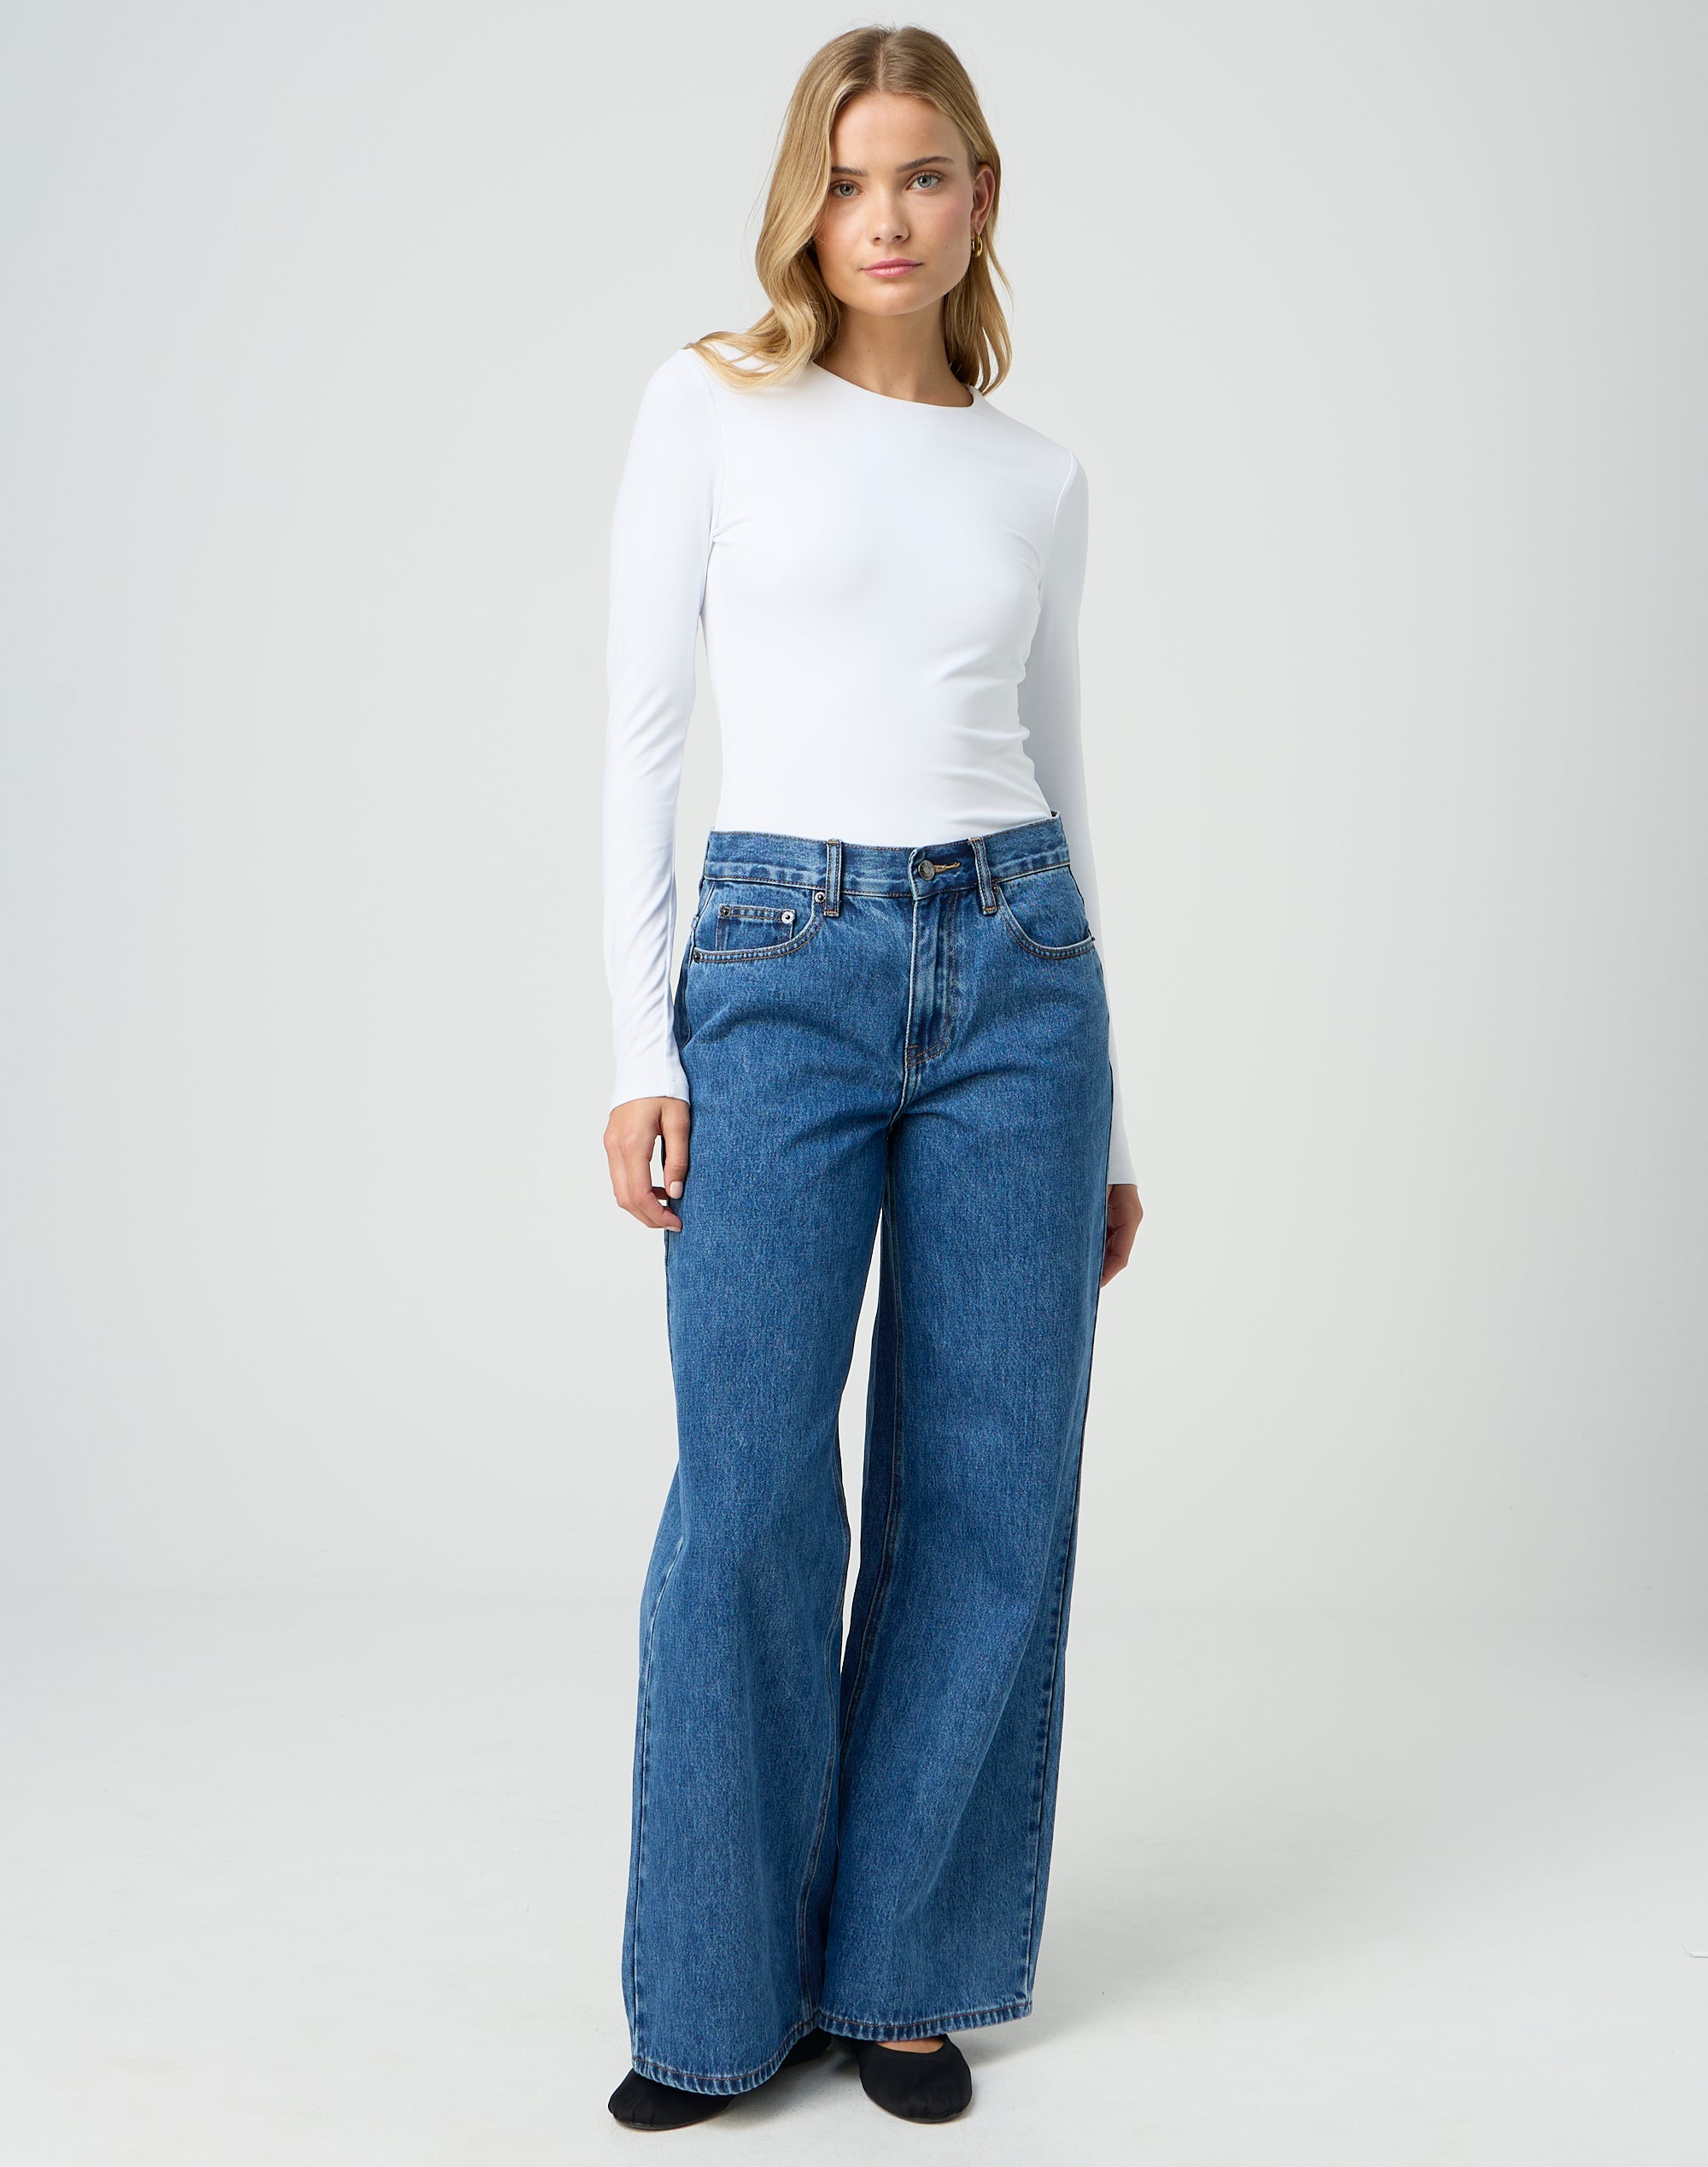 Low Rise Flared Jean in Riley Vintage Wash